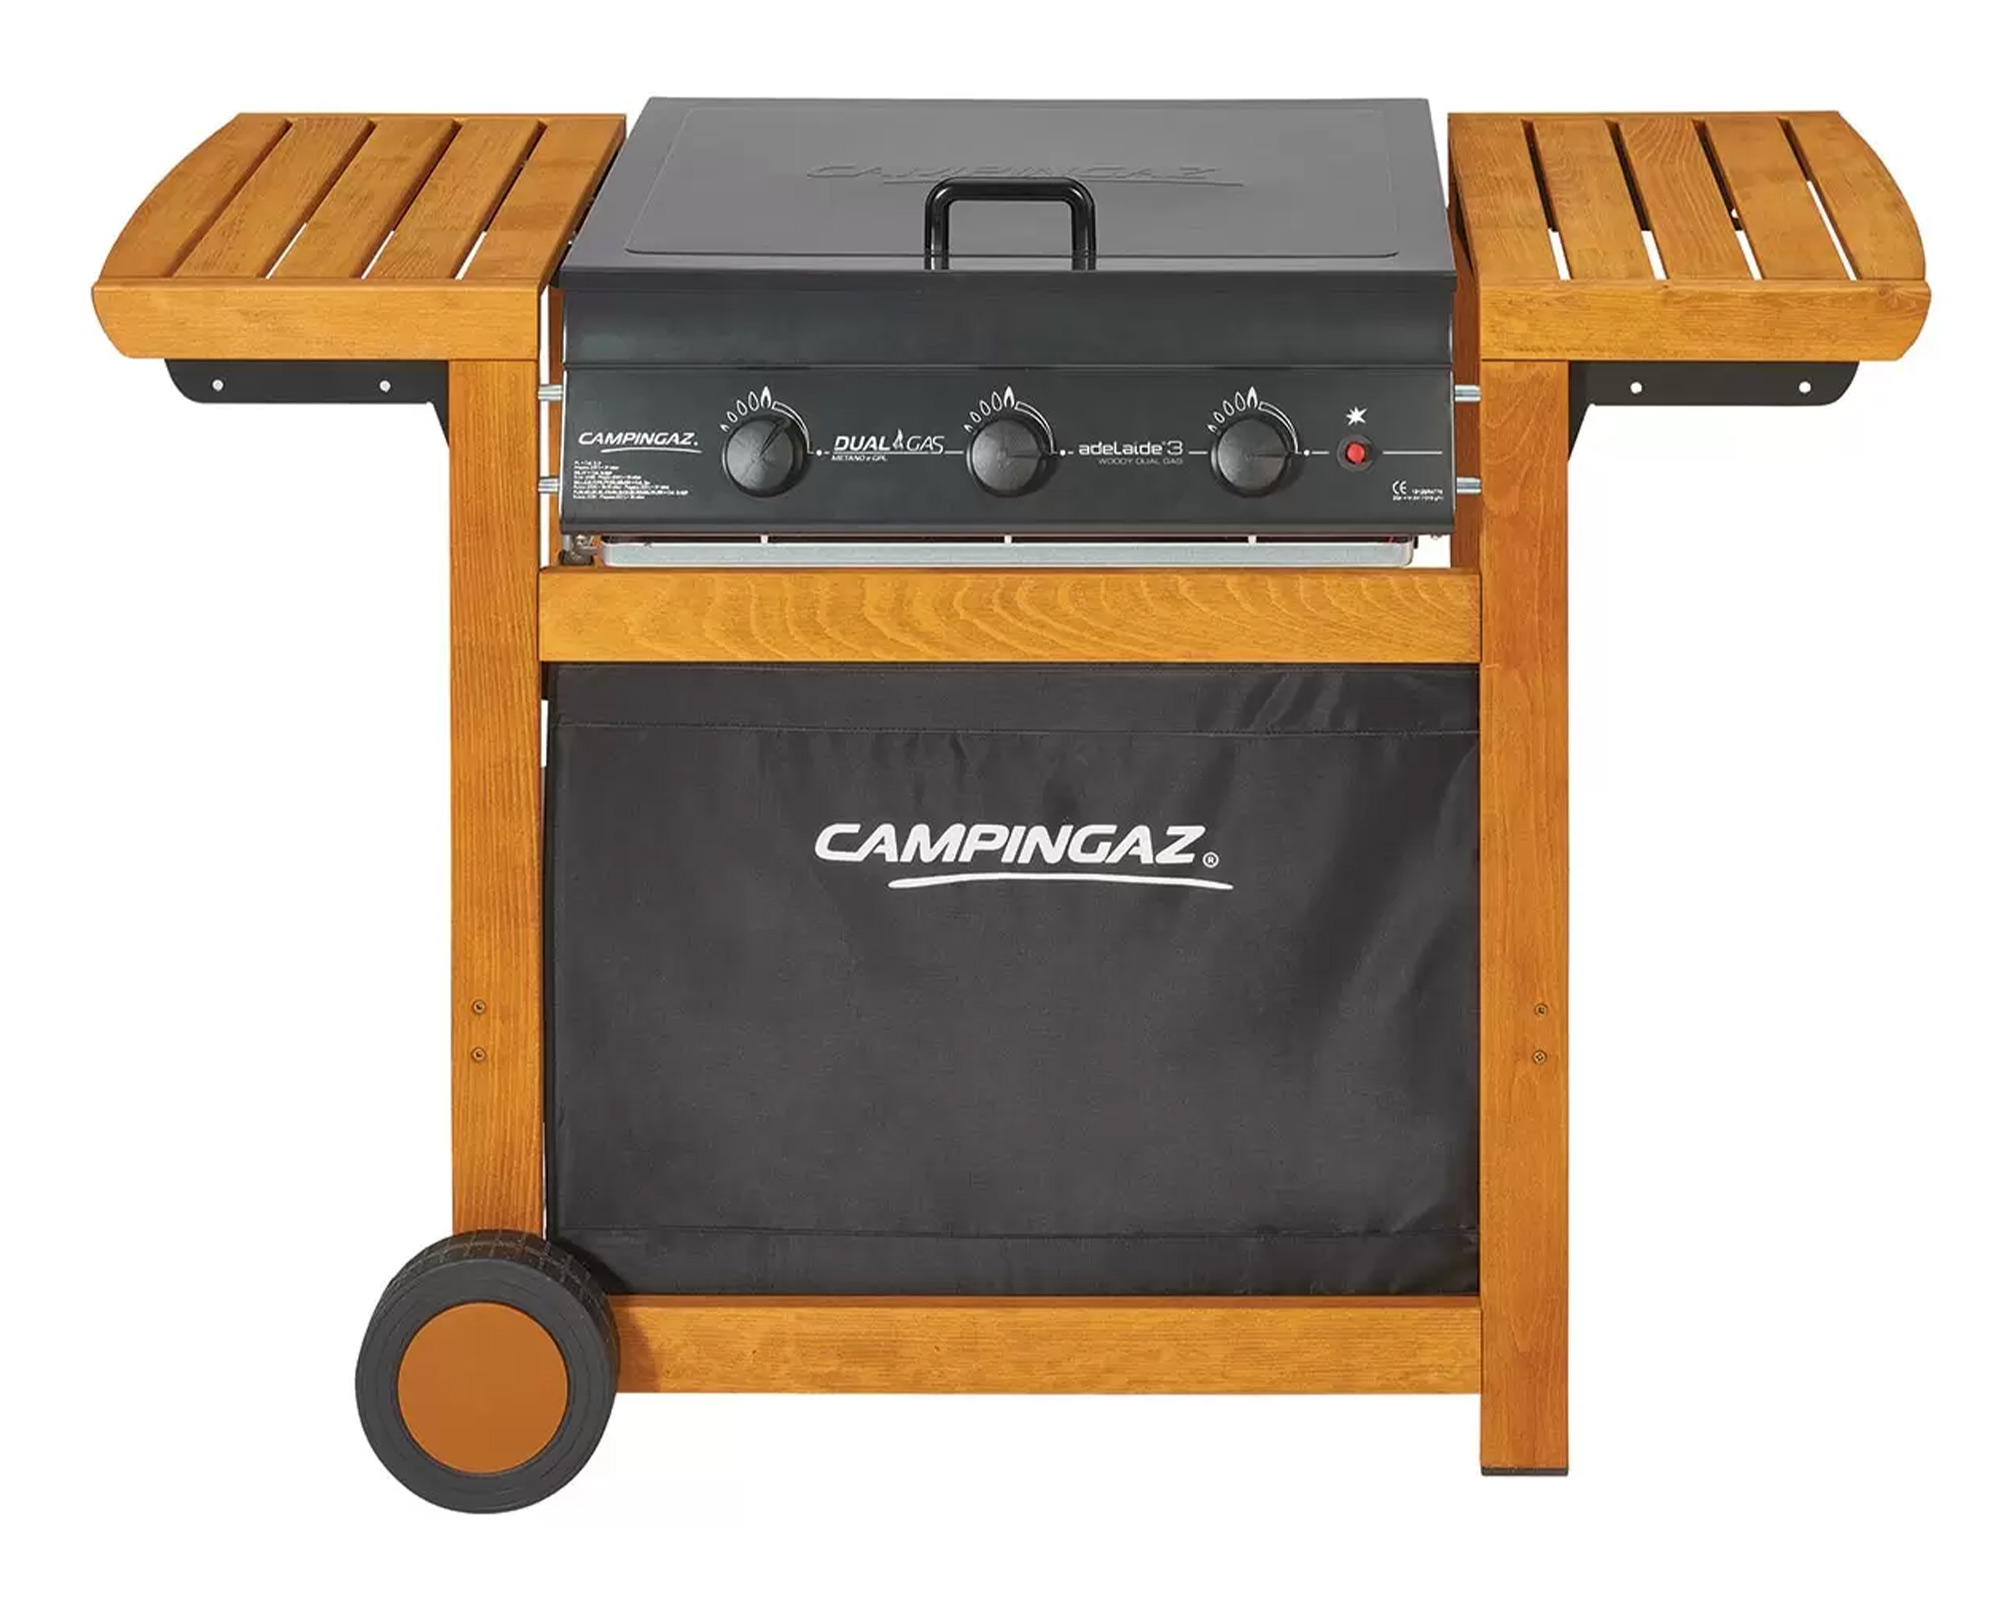 Barbecue Adelaide 3 Woody Dual Gas Campingaz 3000005744